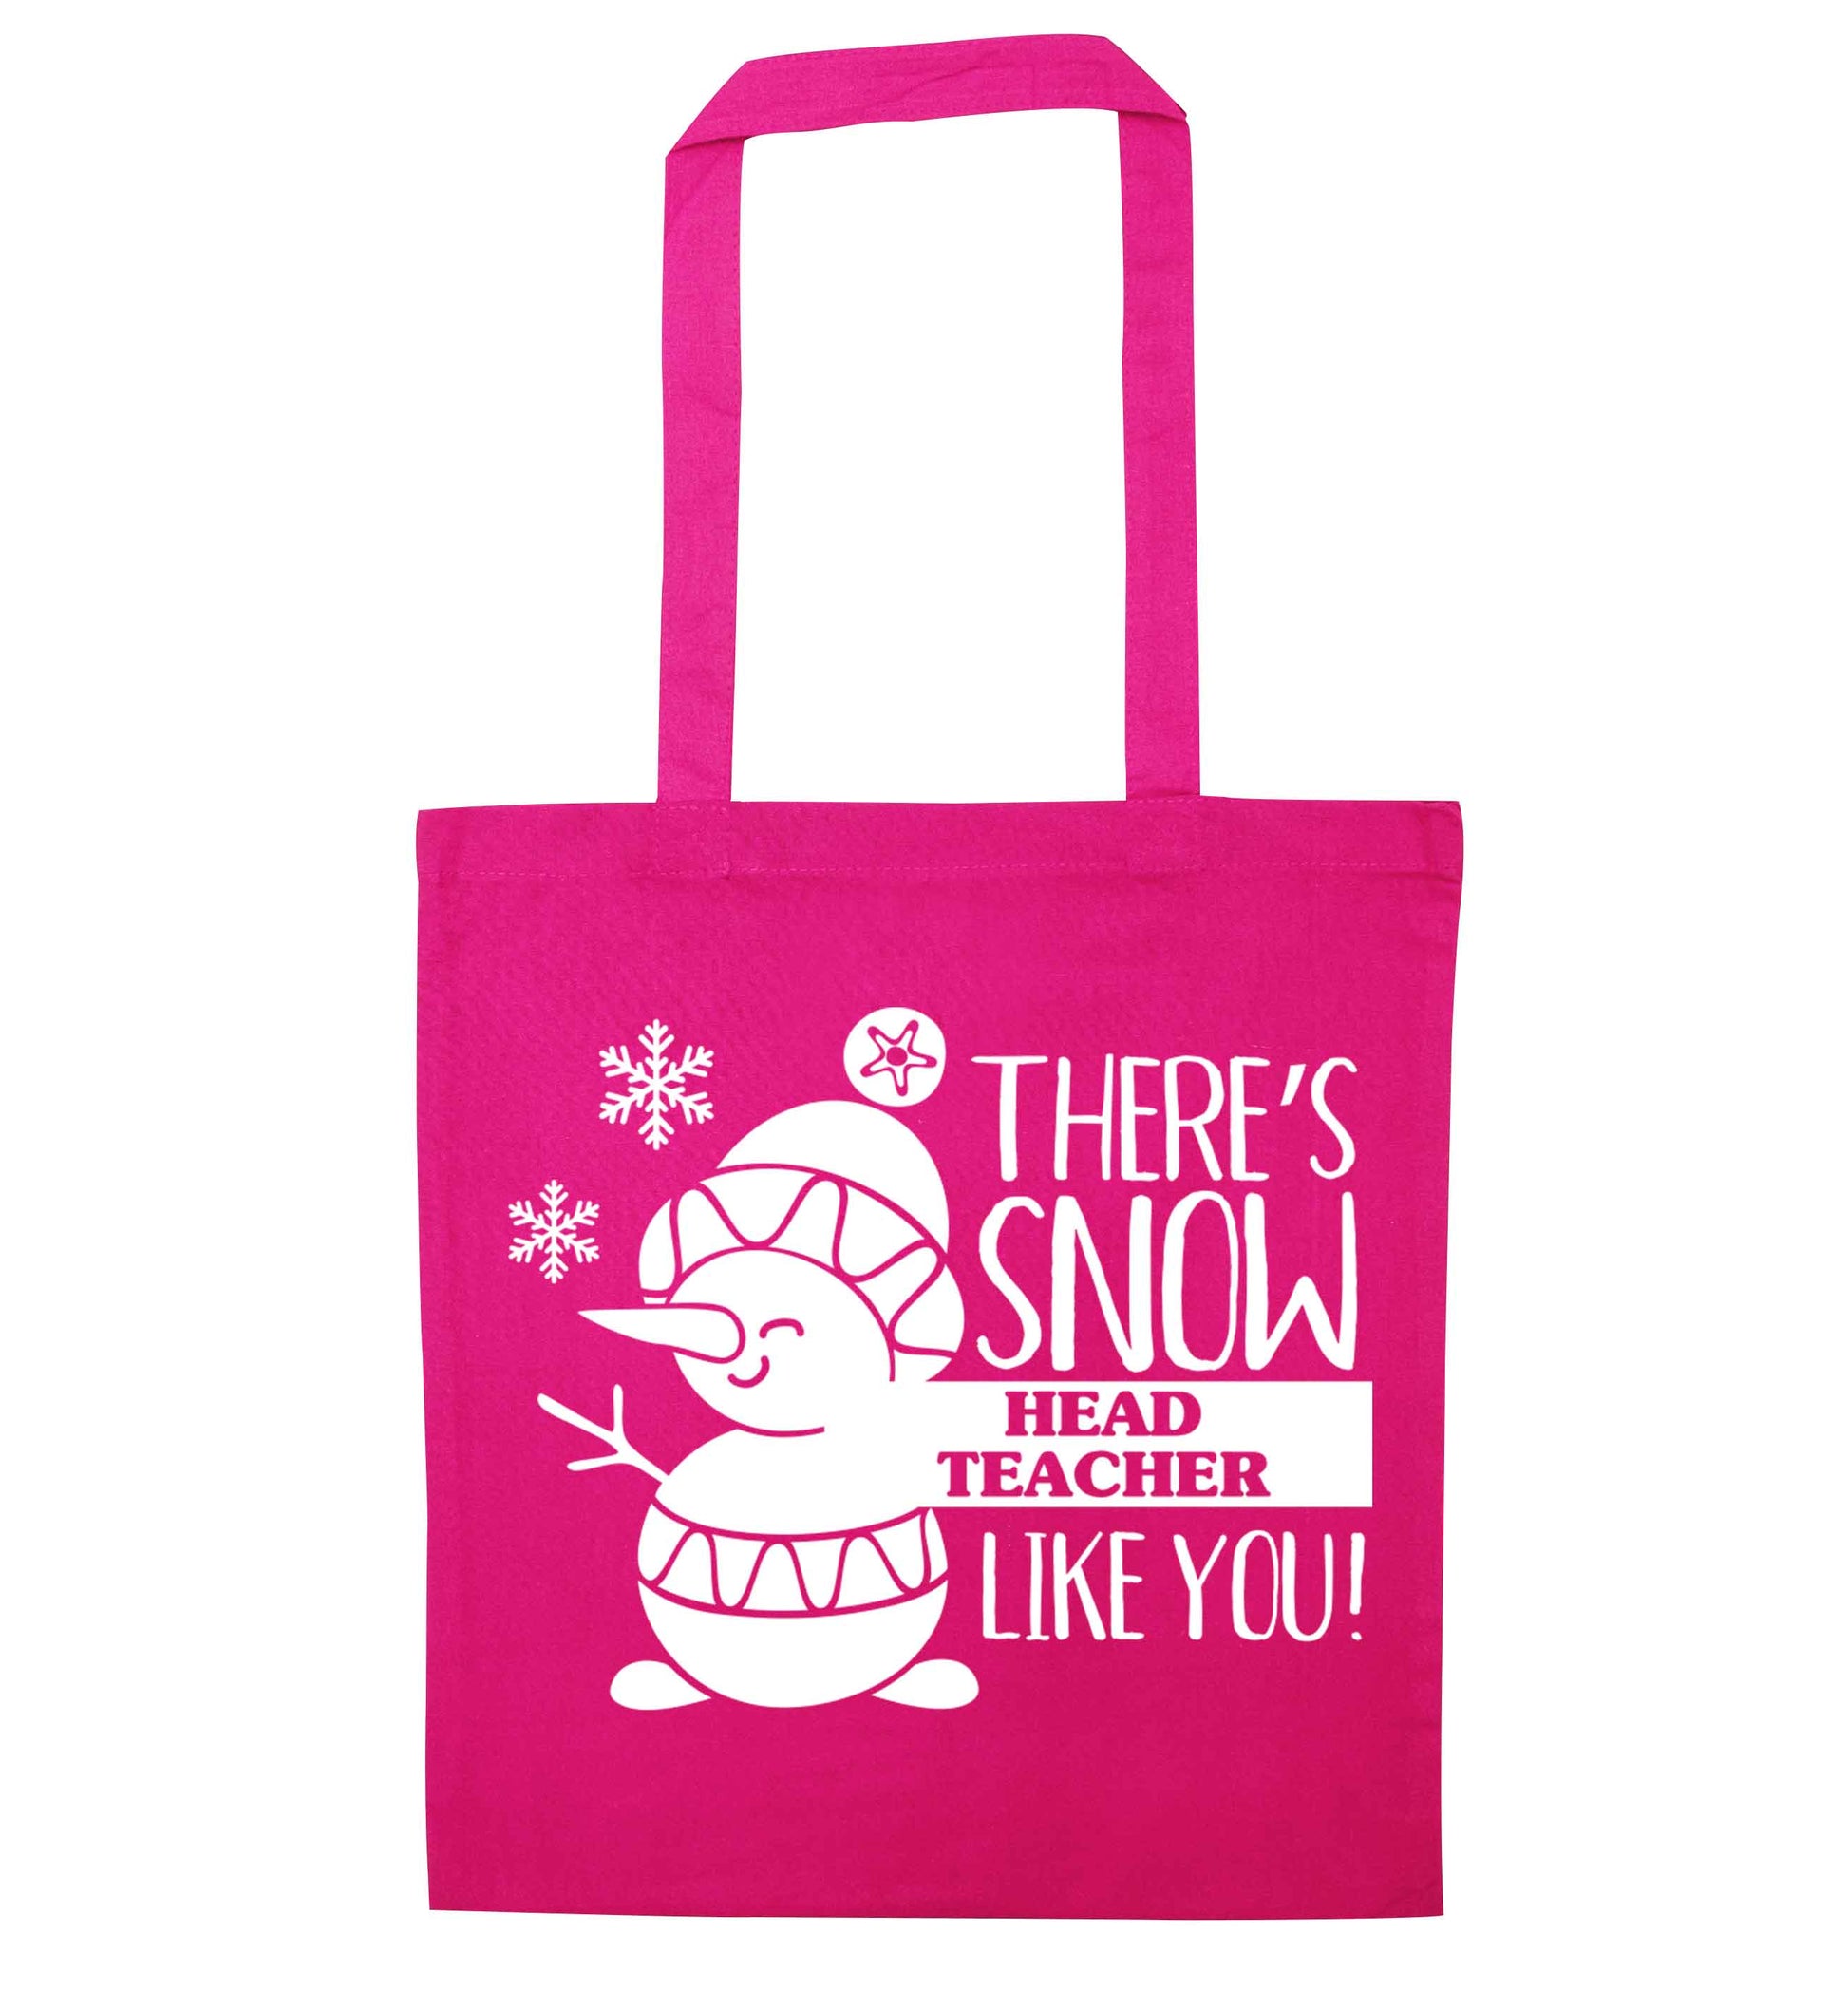 There's snow head teacher like you pink tote bag